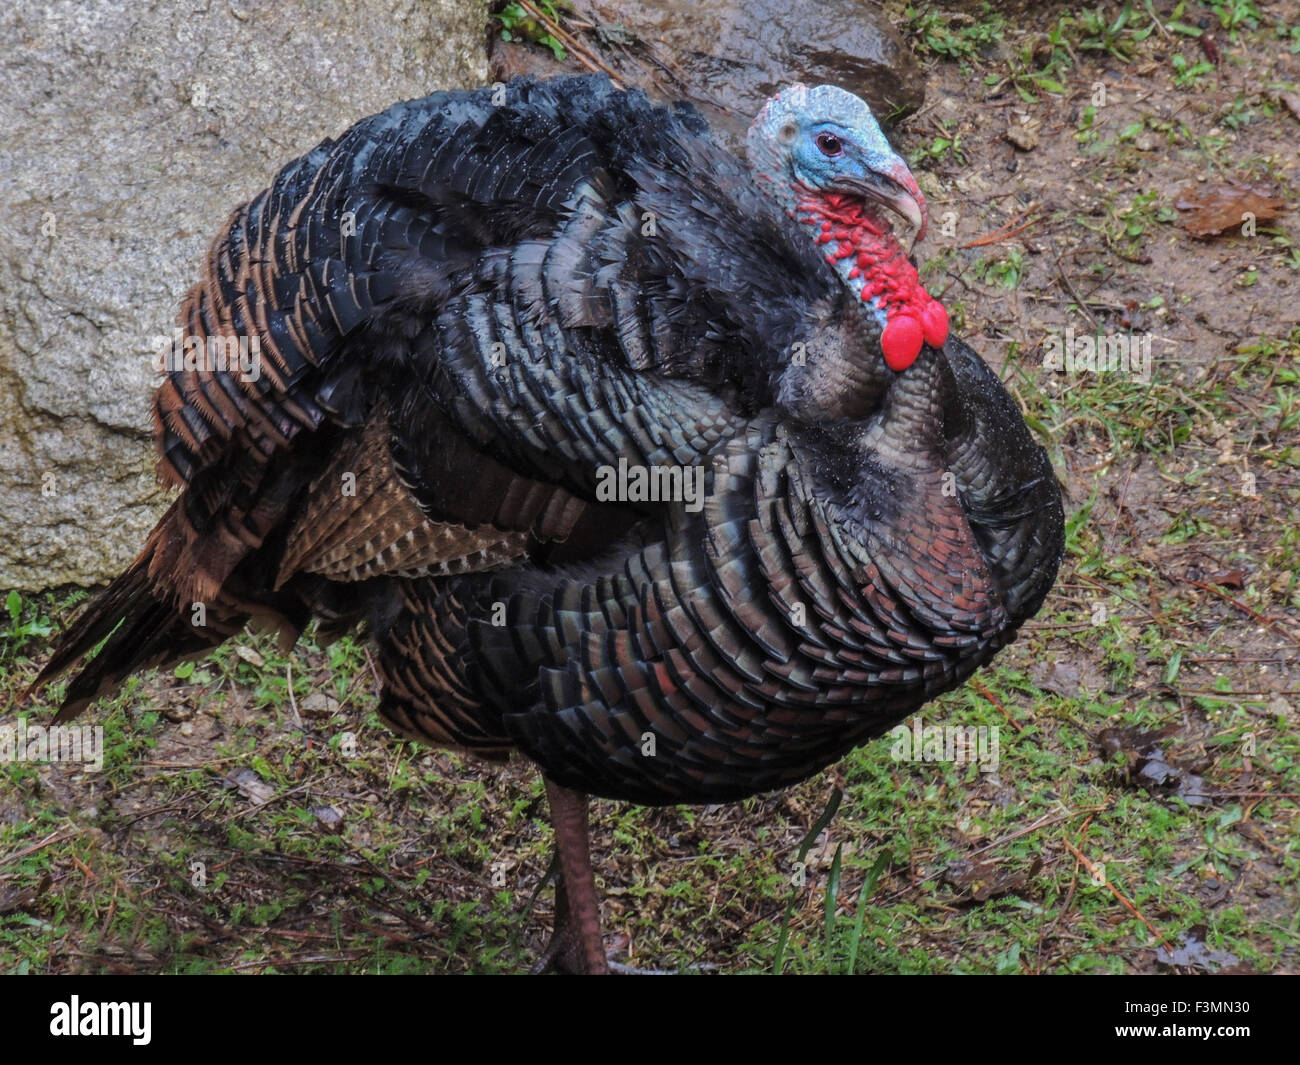 Wild Turkey Male (Meleagris gallopavo) wattles engorged with blood to attract females during the breeding season. Sierra foothil Stock Photo